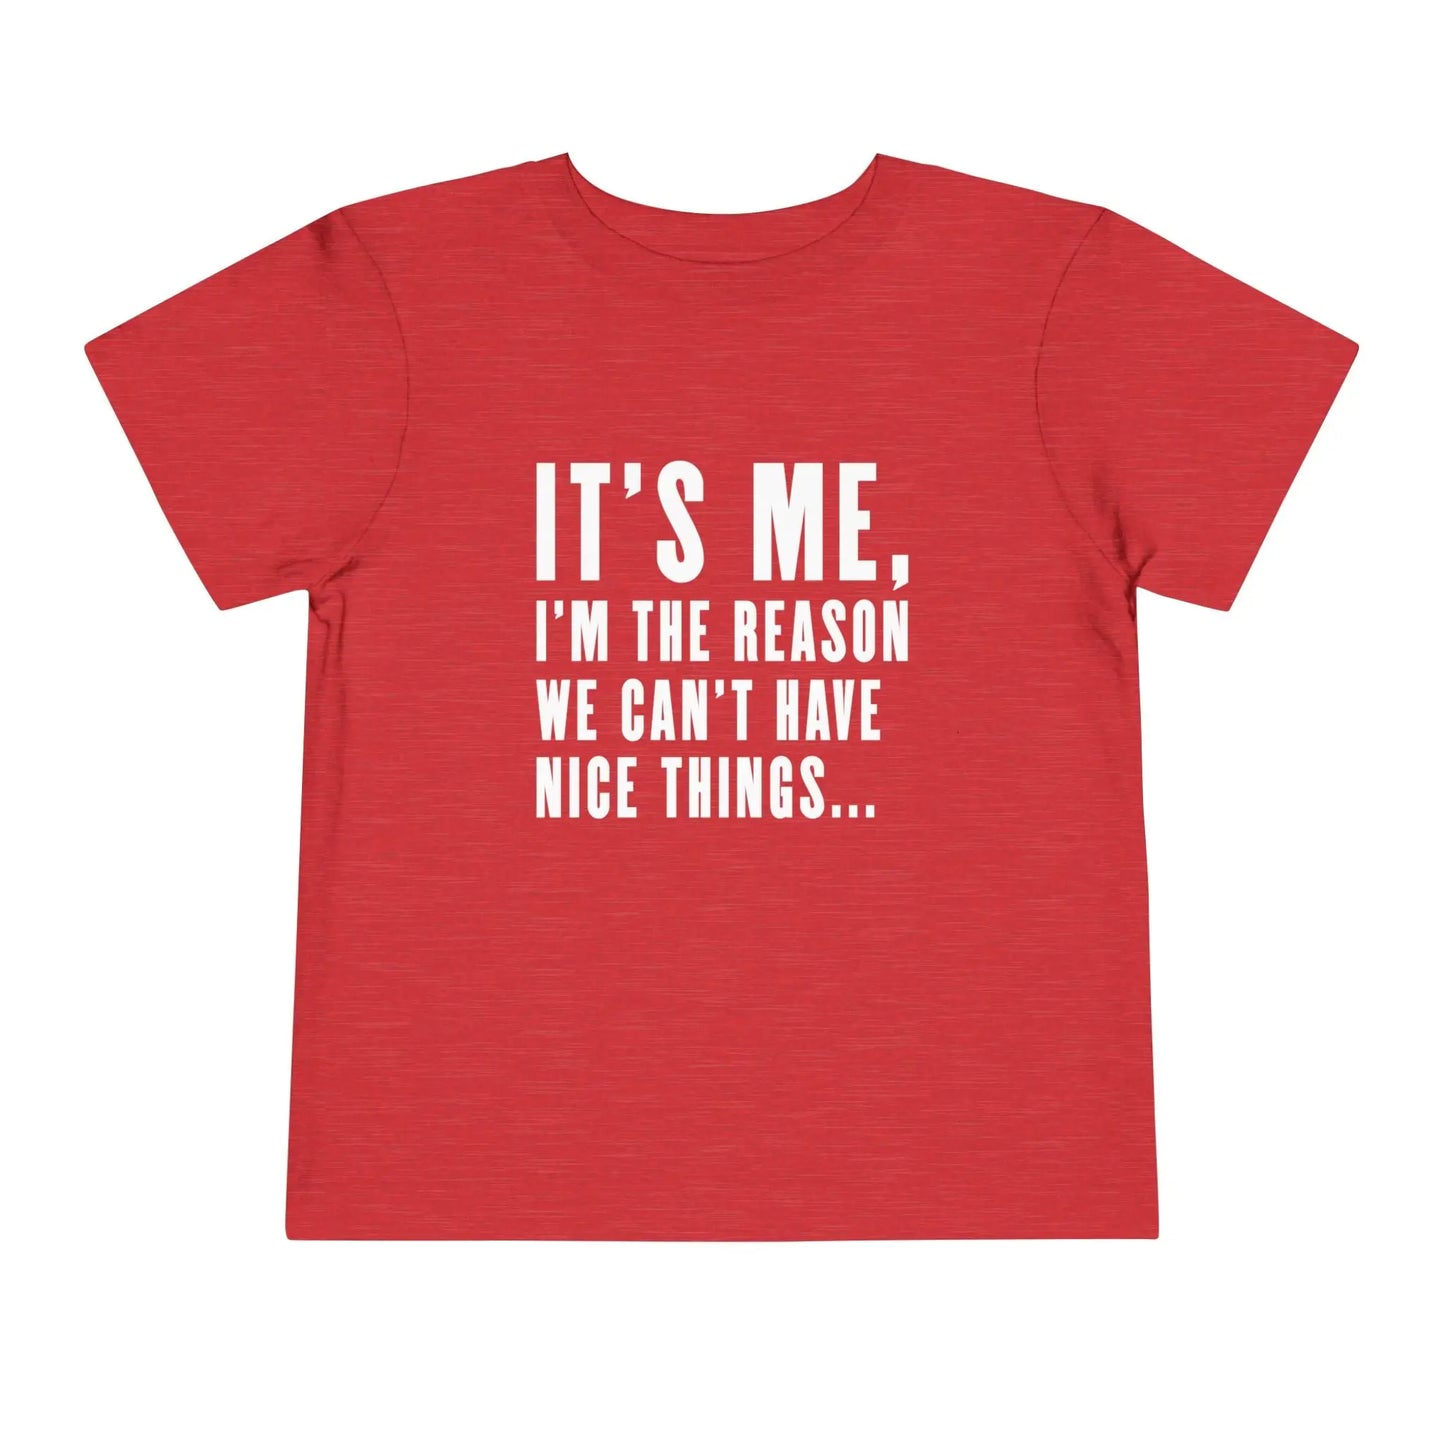 Can't Have Nice Things Toddler Tee - Wicked Tees